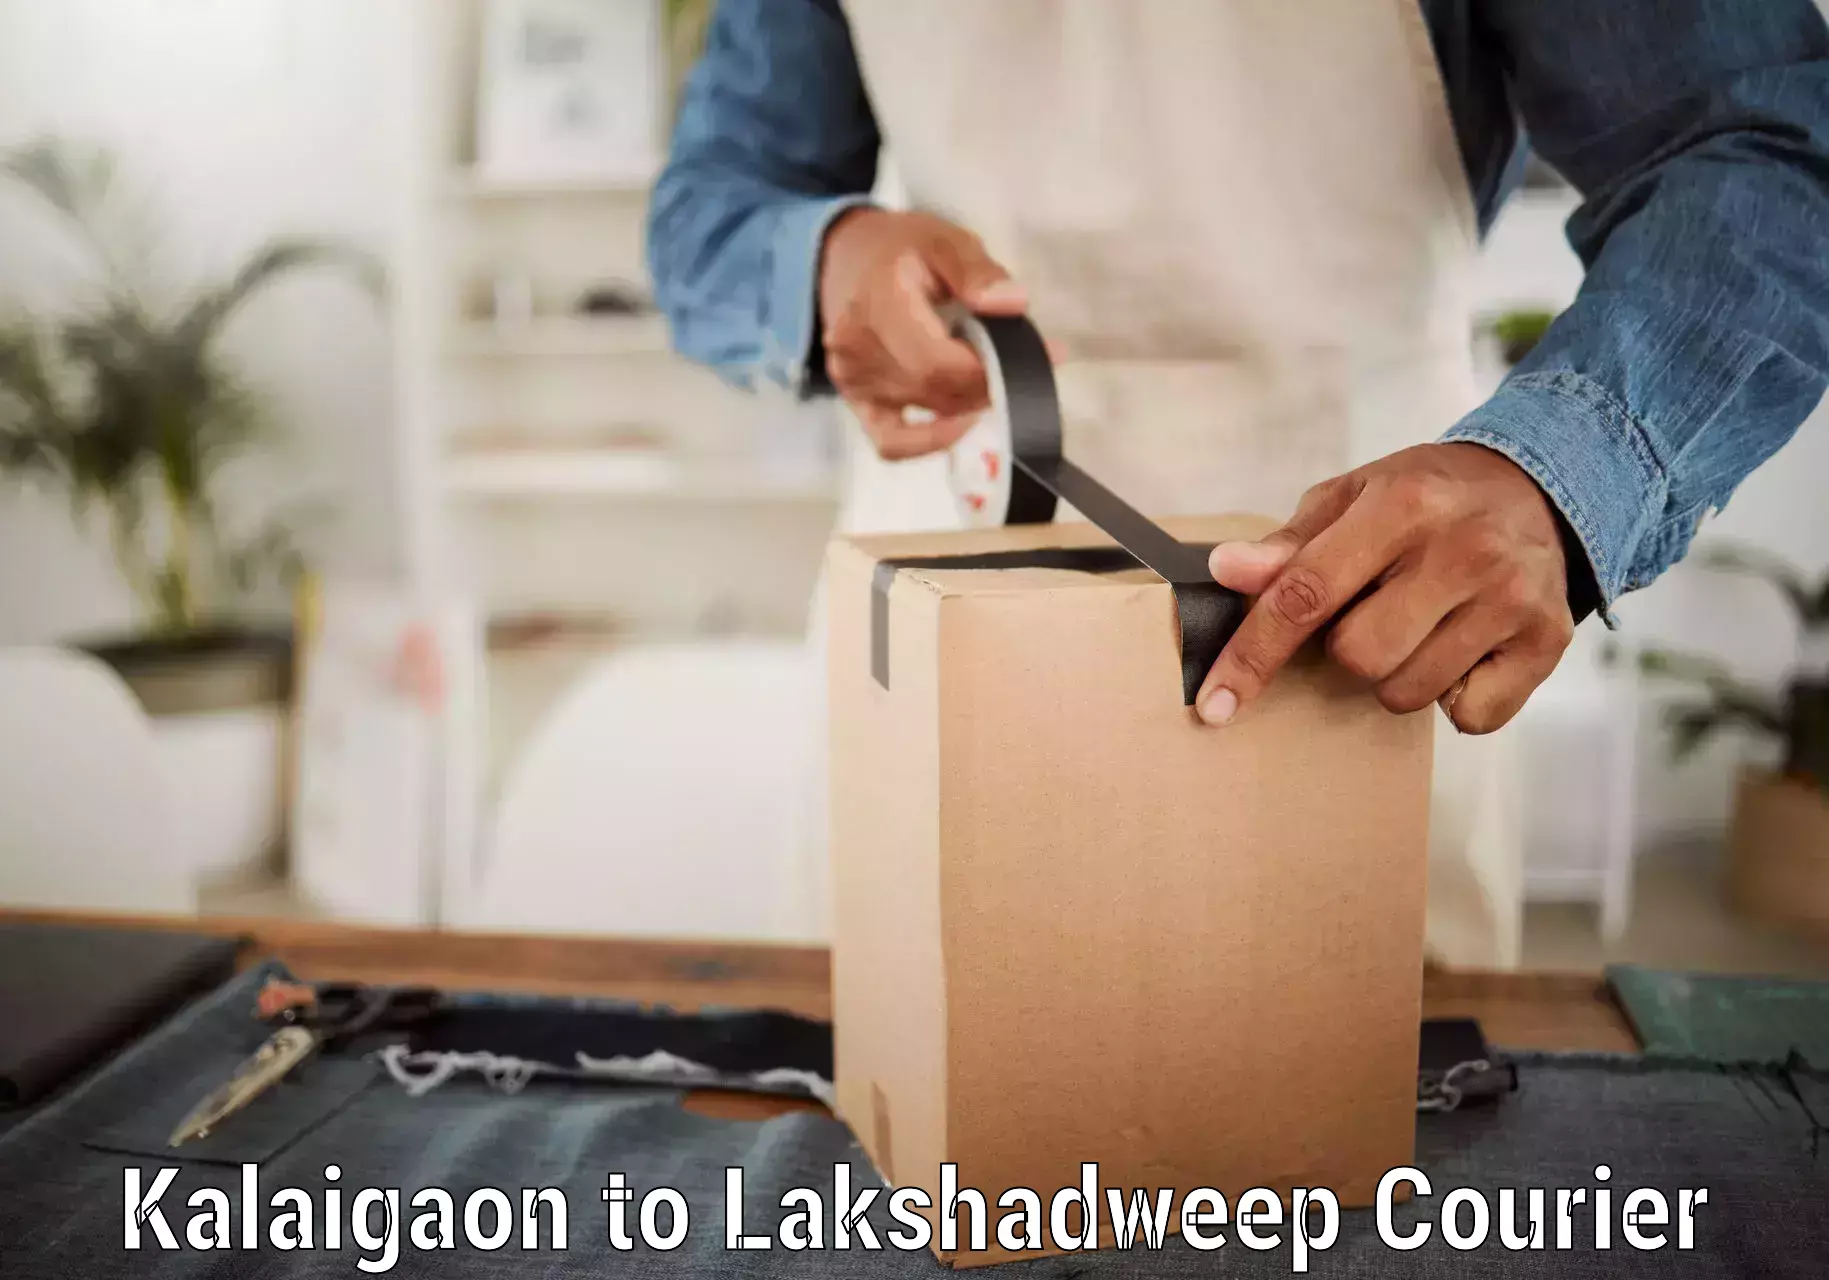 Cash on delivery service Kalaigaon to Lakshadweep